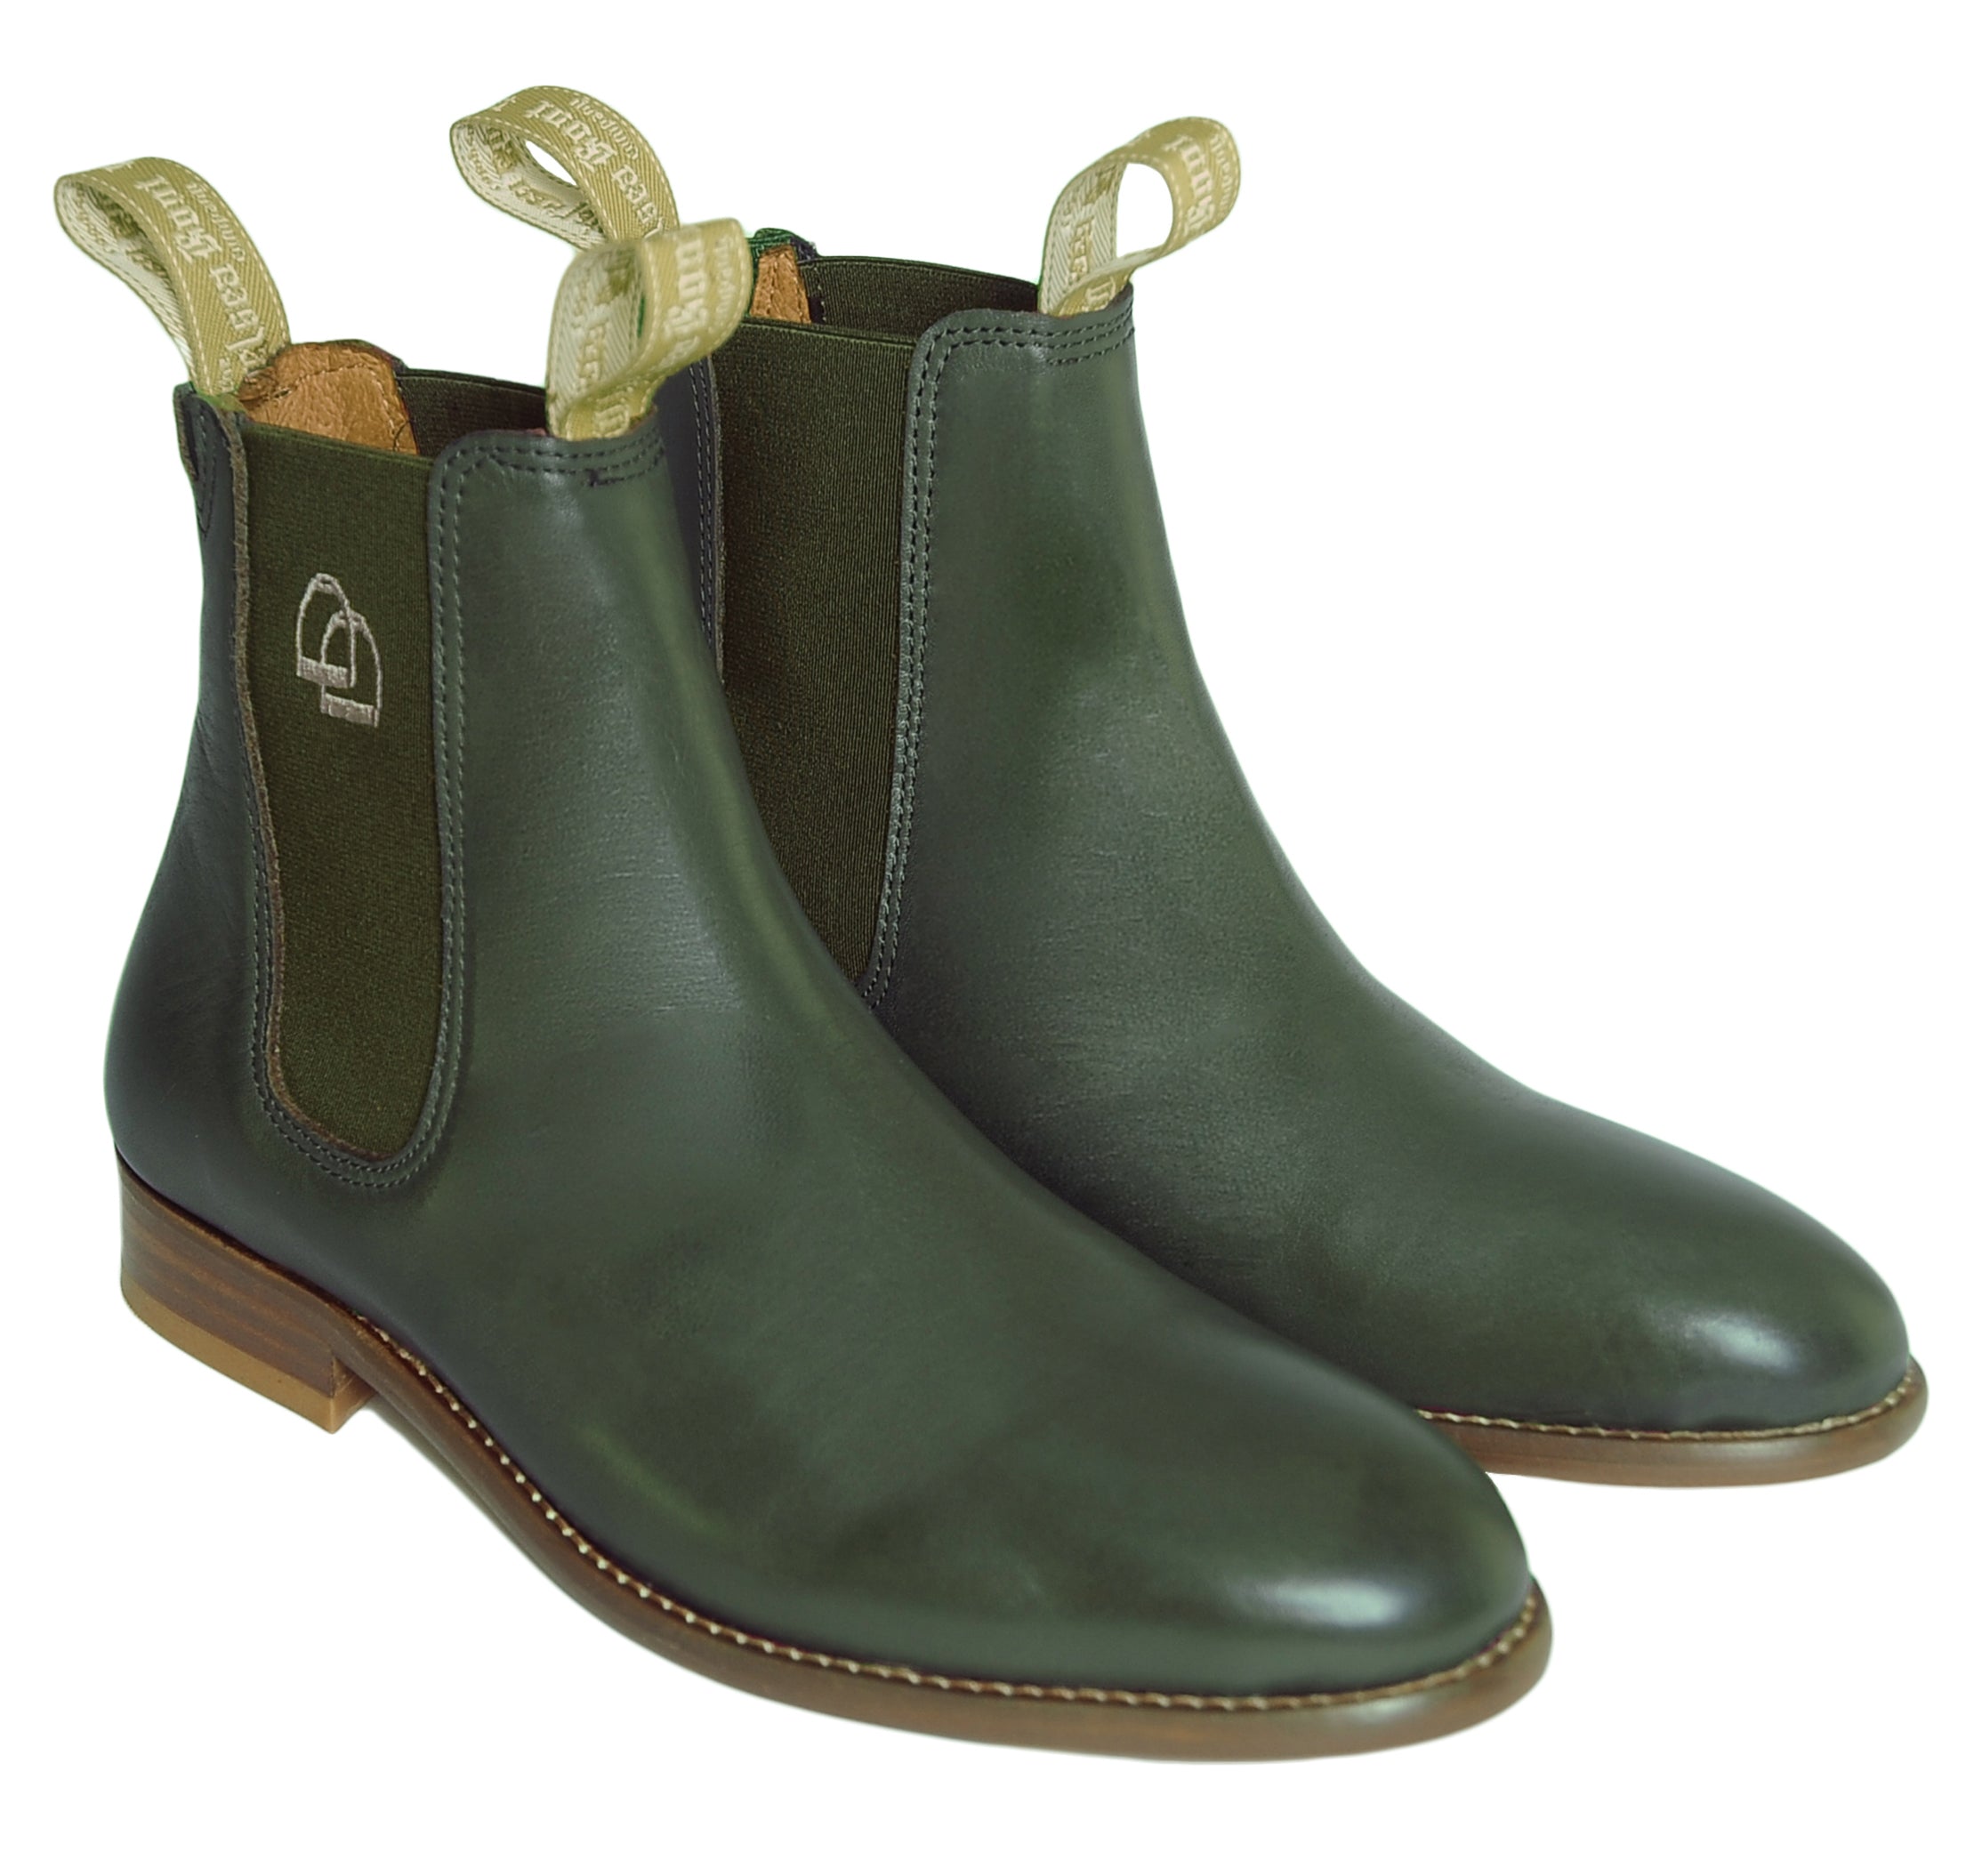 Green Women’s Original Chelsea Boot In Olive Leather 6.5 Uk The Chelsea Boot Co Est. 1851